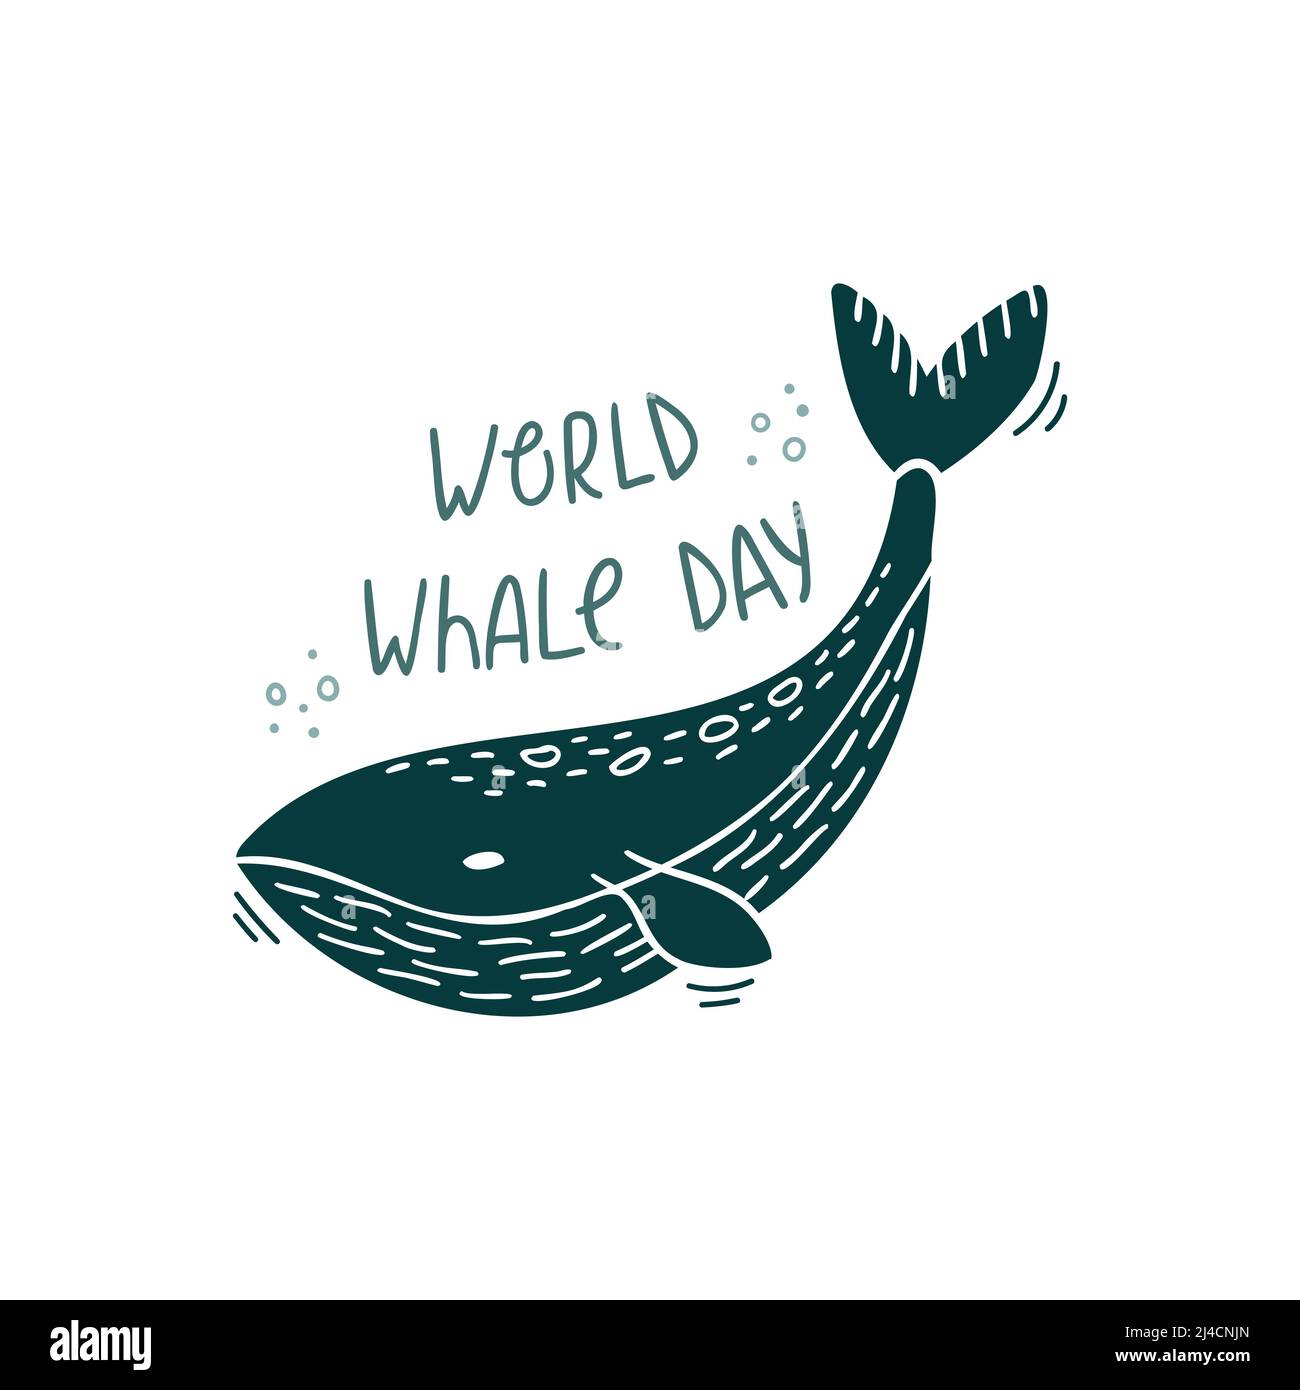 Vector illustration of a whale with hand drawn lettering - World whale day. Stock Vector